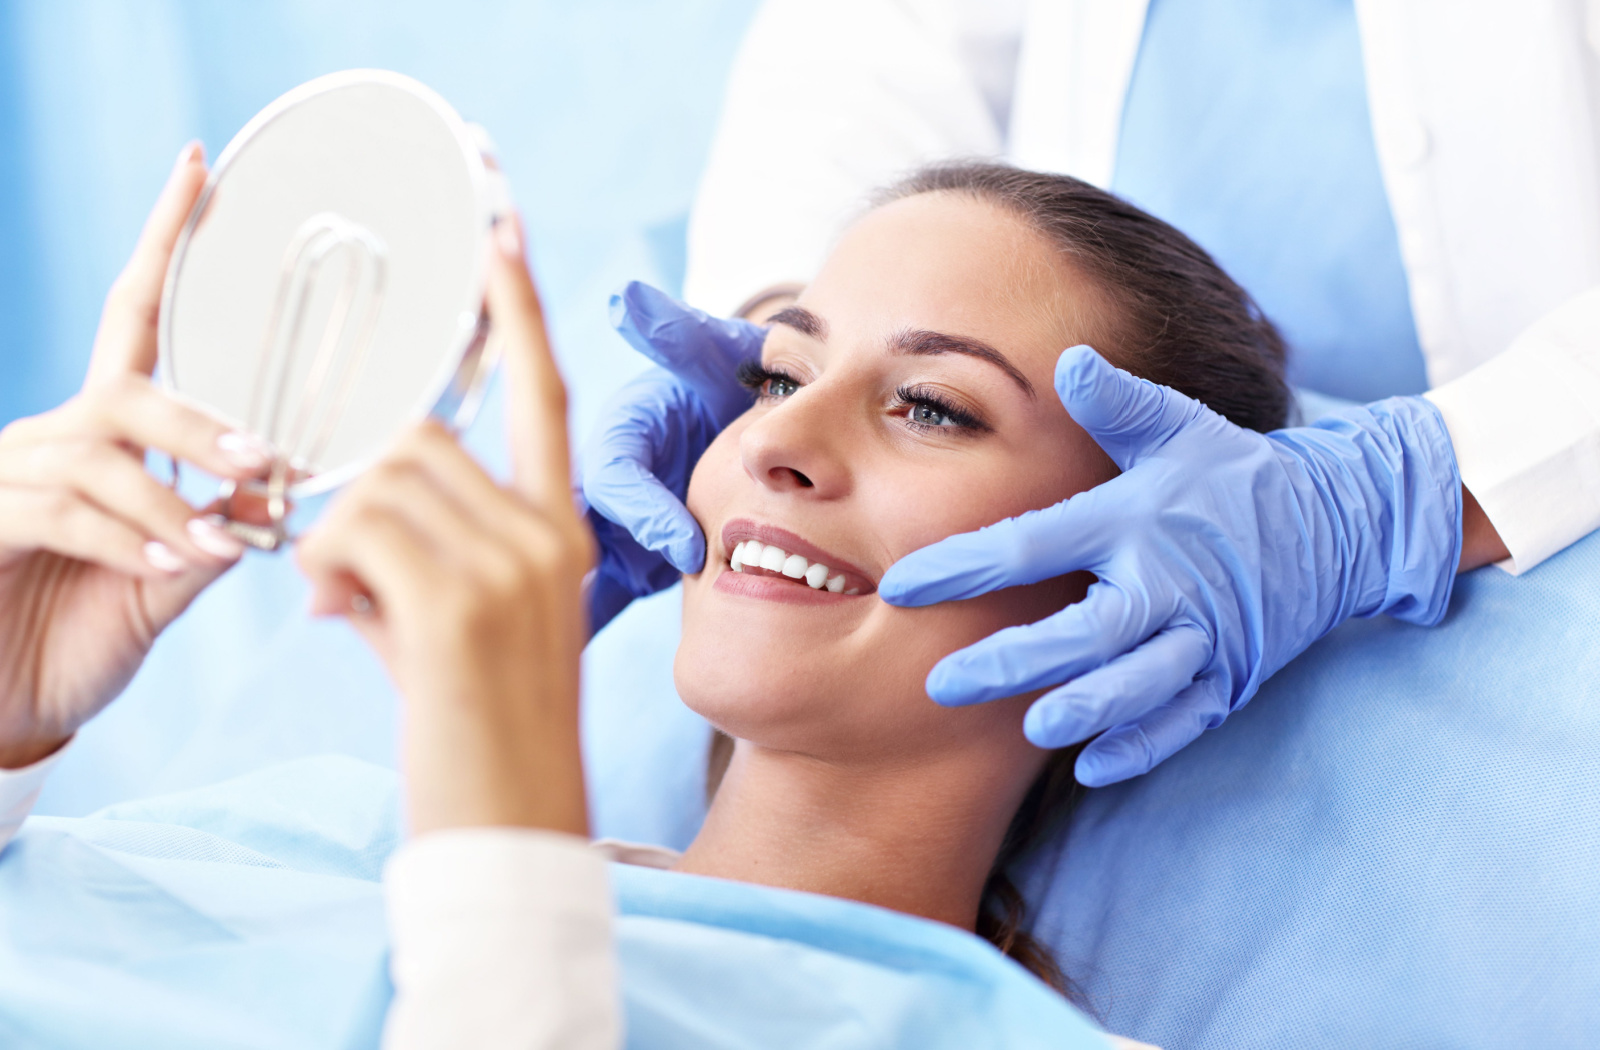 A woman sitting in a dentist’s chair and smiling into a handheld mirror while her dentist gently holds the sides of her face.